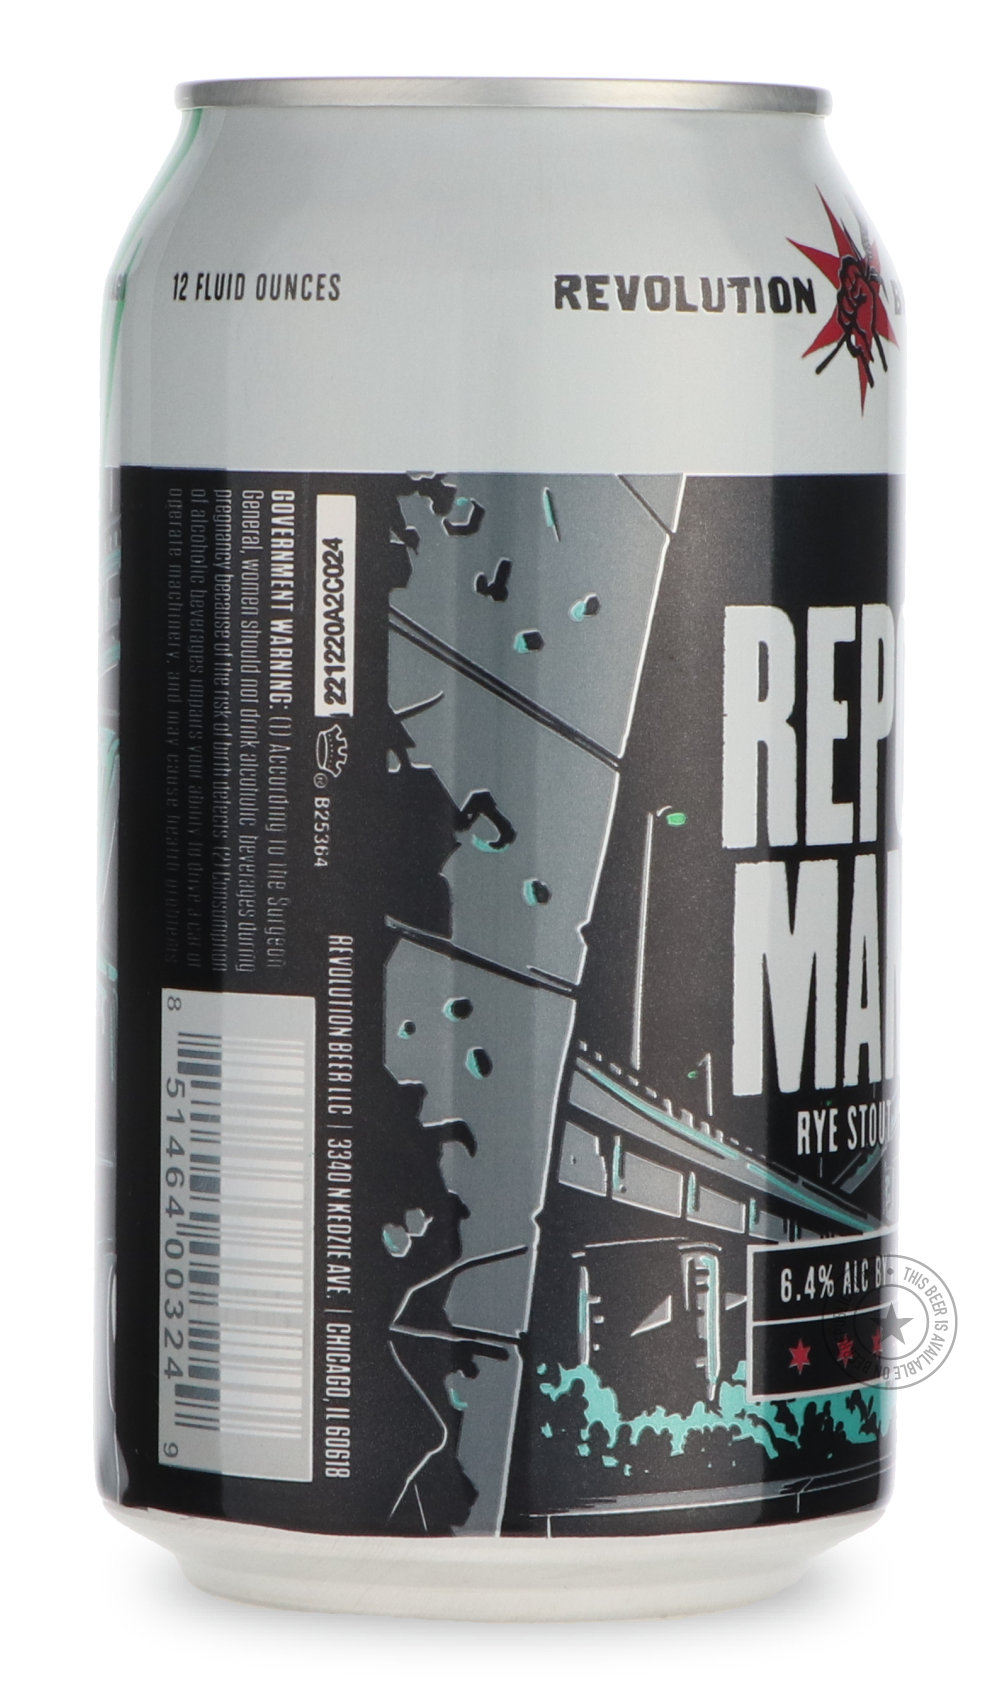 -Revolution- Repo Man-Stout & Porter- Only @ Beer Republic - The best online beer store for American & Canadian craft beer - Buy beer online from the USA and Canada - Bier online kopen - Amerikaans bier kopen - Craft beer store - Craft beer kopen - Amerikanisch bier kaufen - Bier online kaufen - Acheter biere online - IPA - Stout - Porter - New England IPA - Hazy IPA - Imperial Stout - Barrel Aged - Barrel Aged Imperial Stout - Brown - Dark beer - Blond - Blonde - Pilsner - Lager - Wheat - Weizen - Amber - 